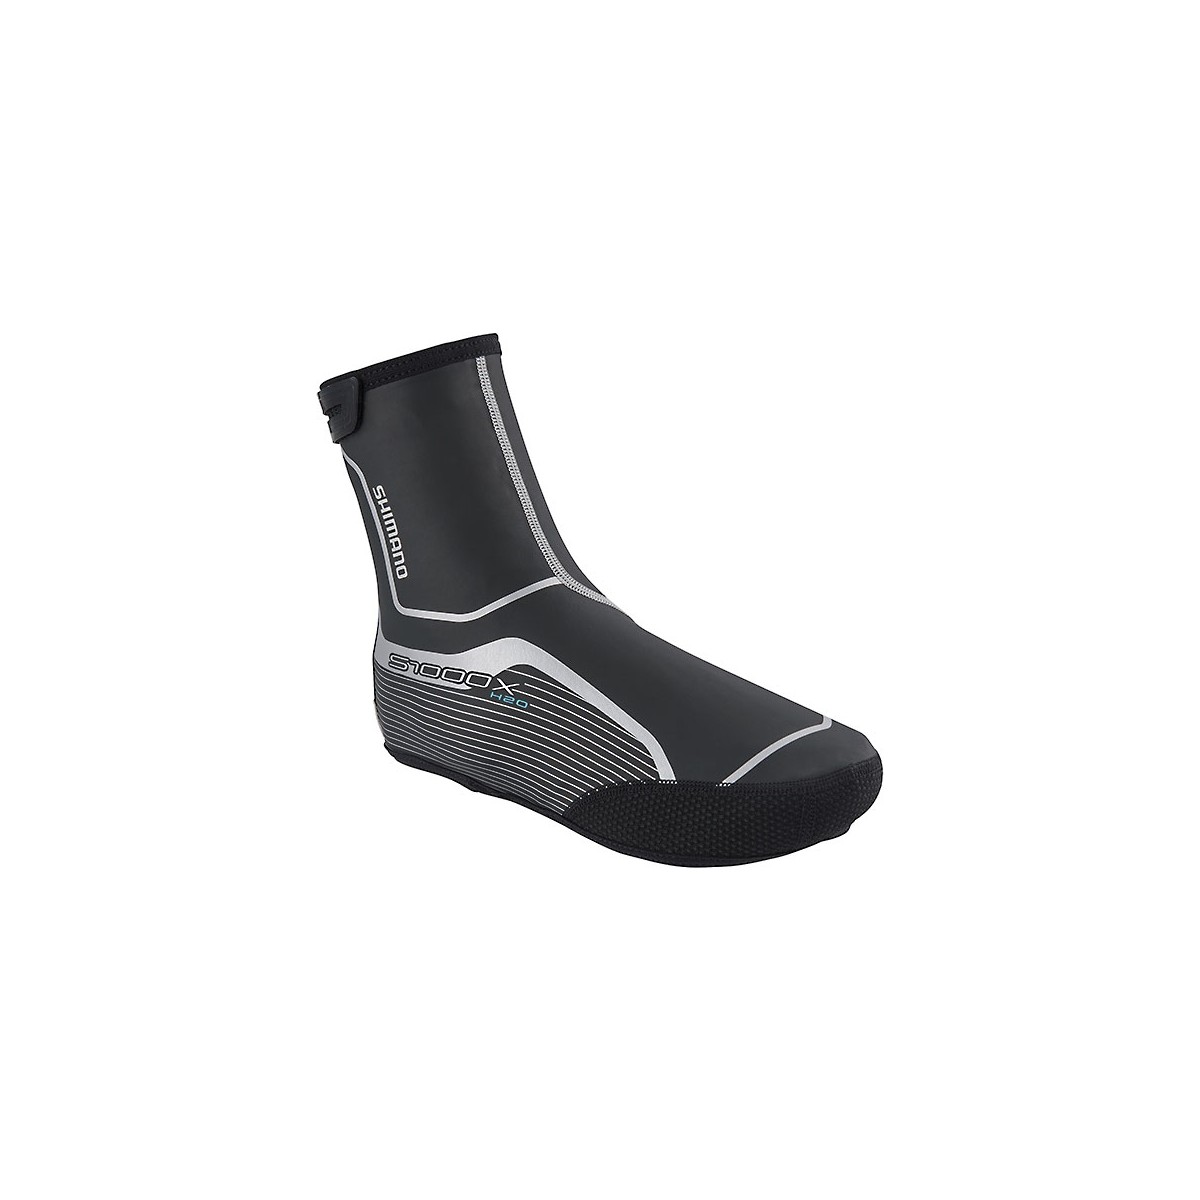 Couvre-chaussures VTT Mavic Crossmax Pro Thermo Shoe Cover